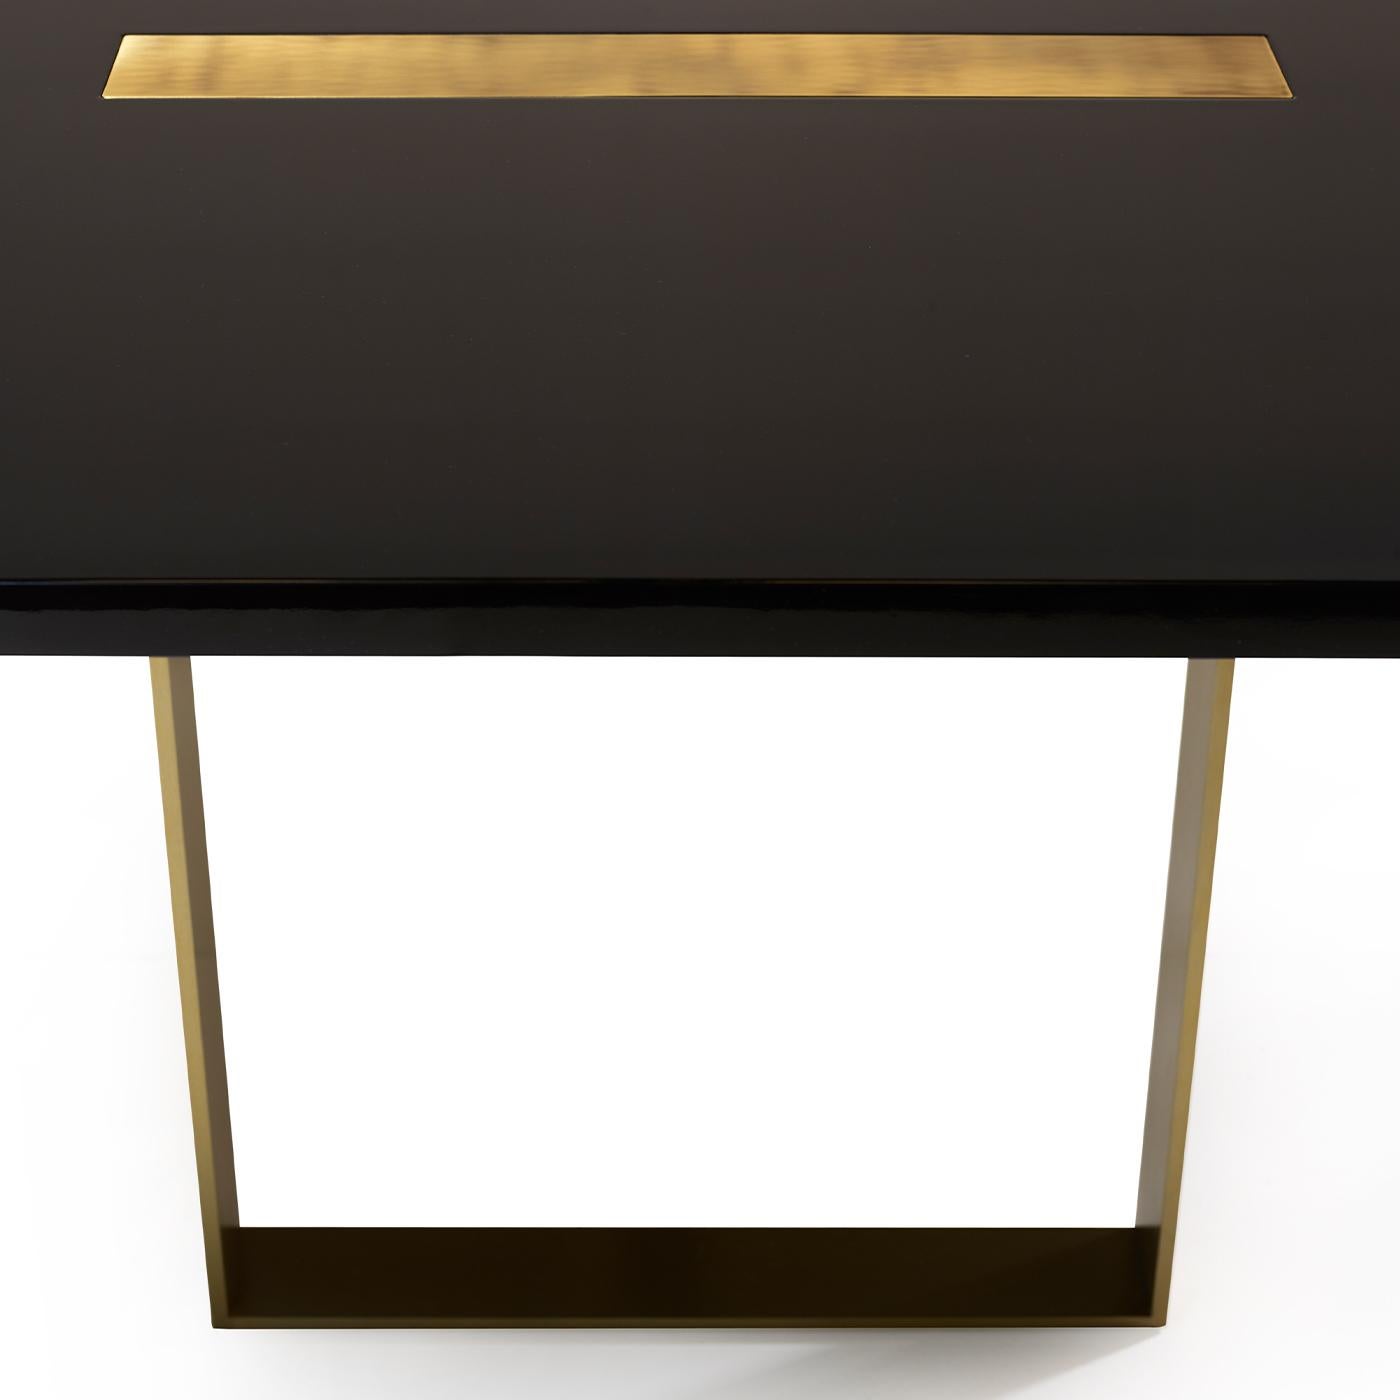 This elegant table, designed by Studio 63 for Marioni, has a lacquered rectangular wooden top with one rectangular brass insert and one rectangular marble and metal insert. These two elements extend downwards serving also as supports for the table.